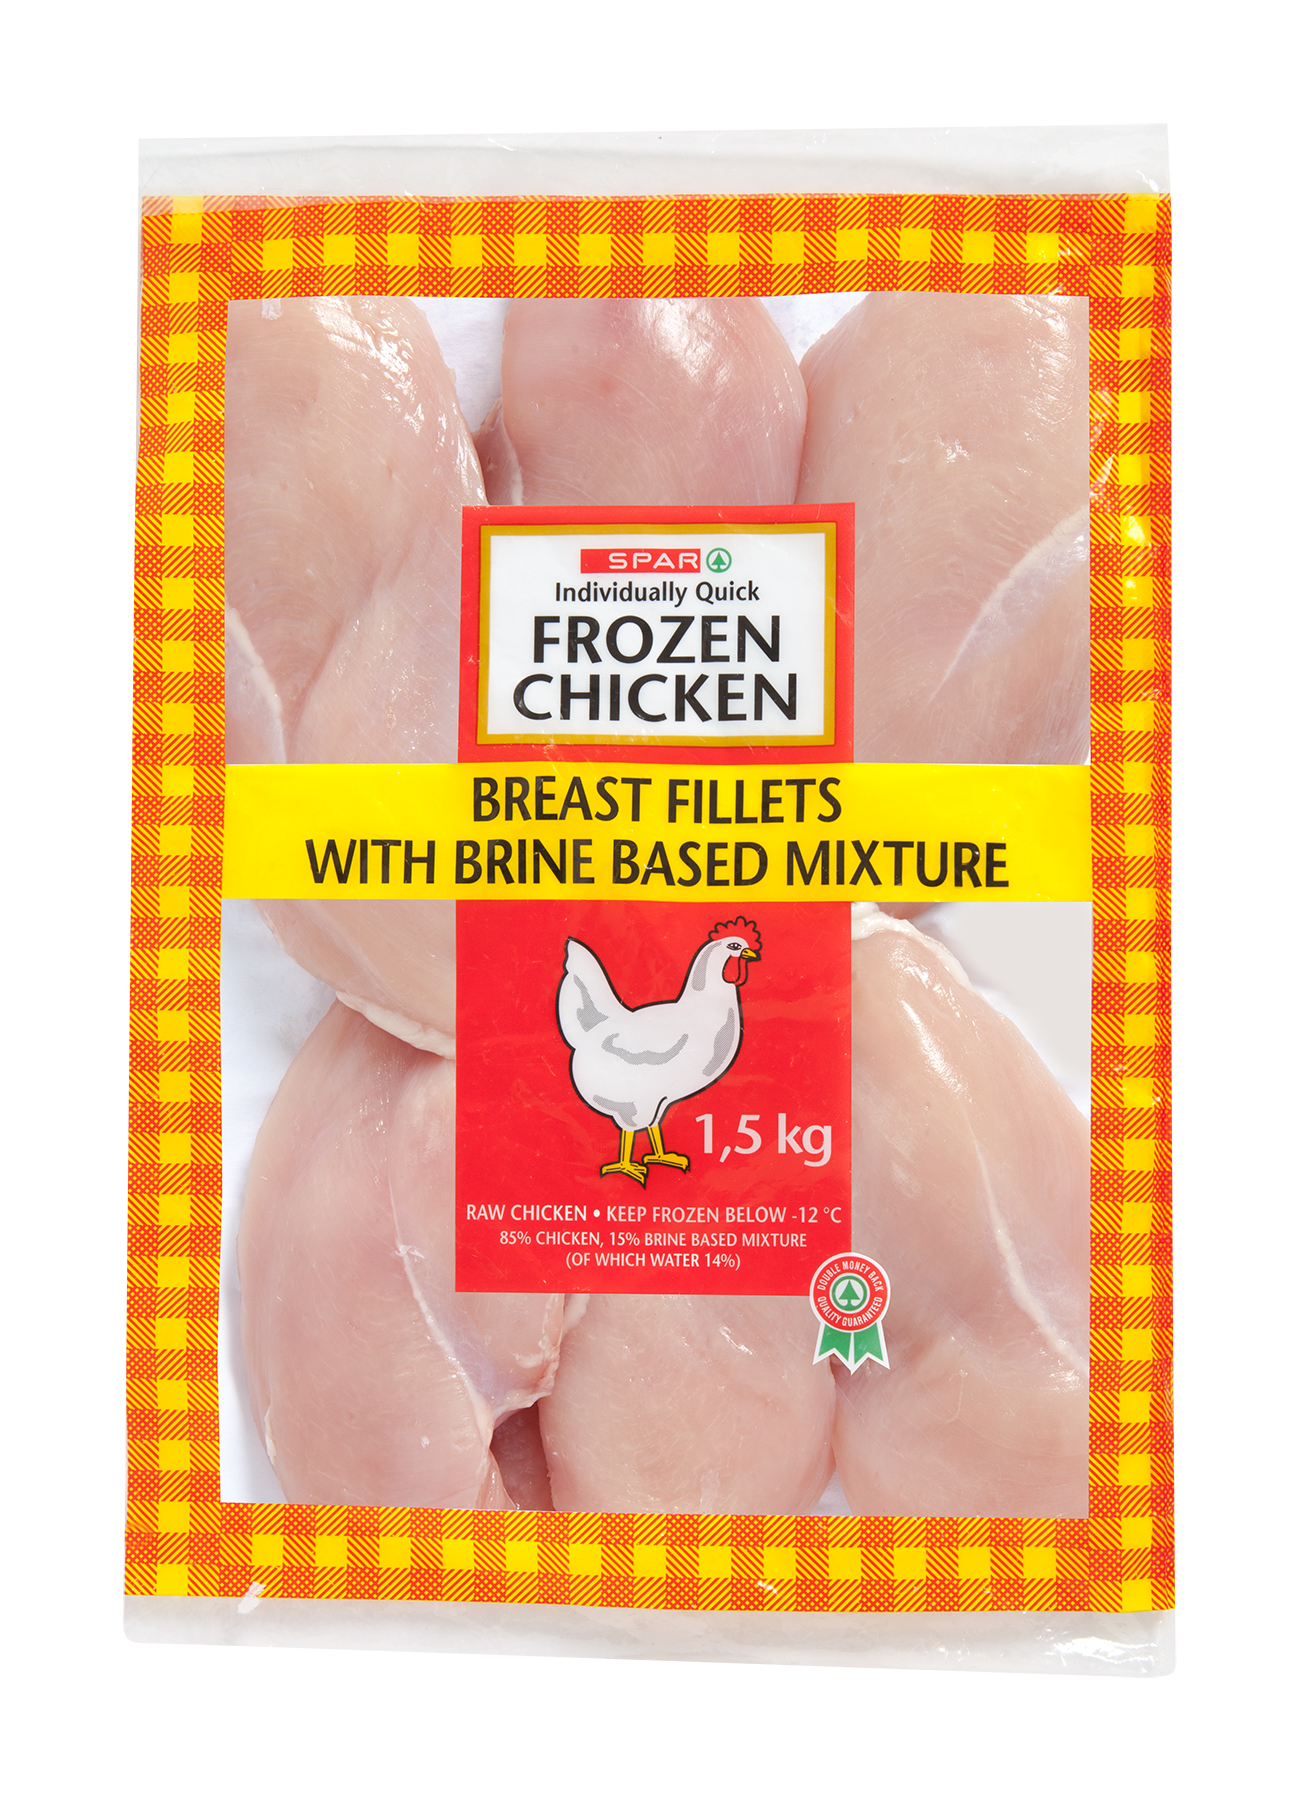 individually quick frozen chicken breast fillets with brine based mixture